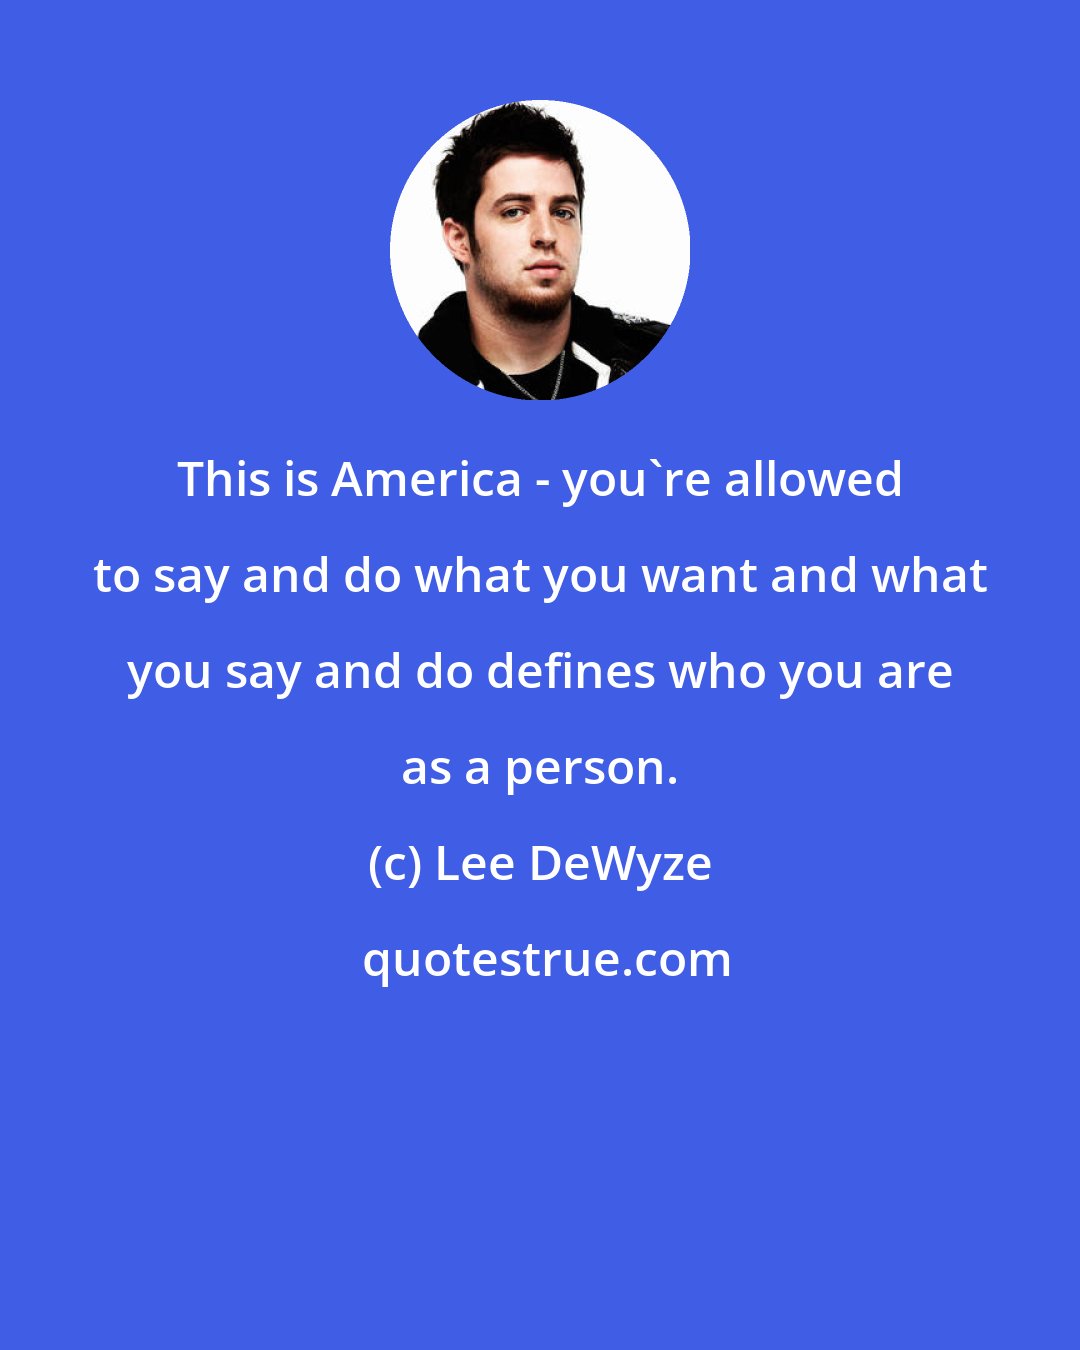 Lee DeWyze: This is America - you're allowed to say and do what you want and what you say and do defines who you are as a person.